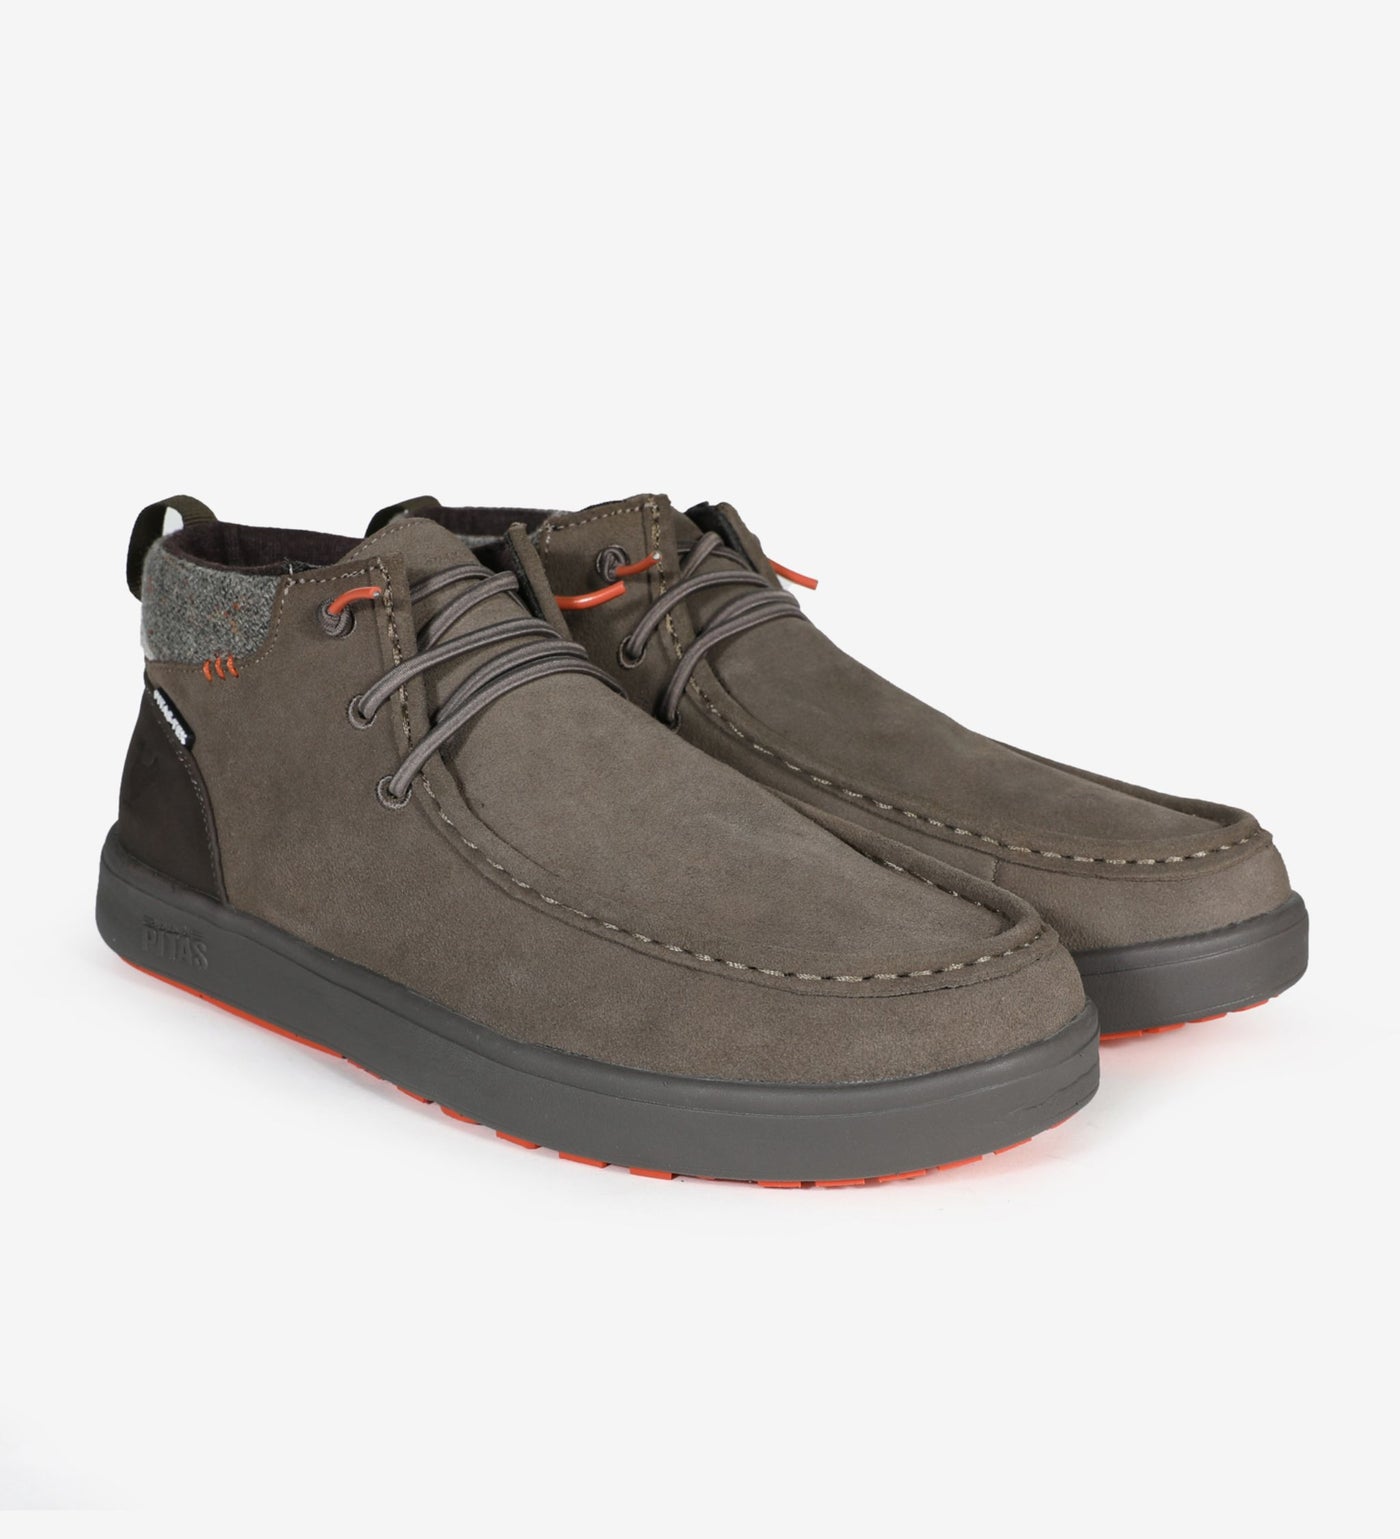 Hey Dude Shoes Men's Paul Recycled Leather Sahara Review – What's